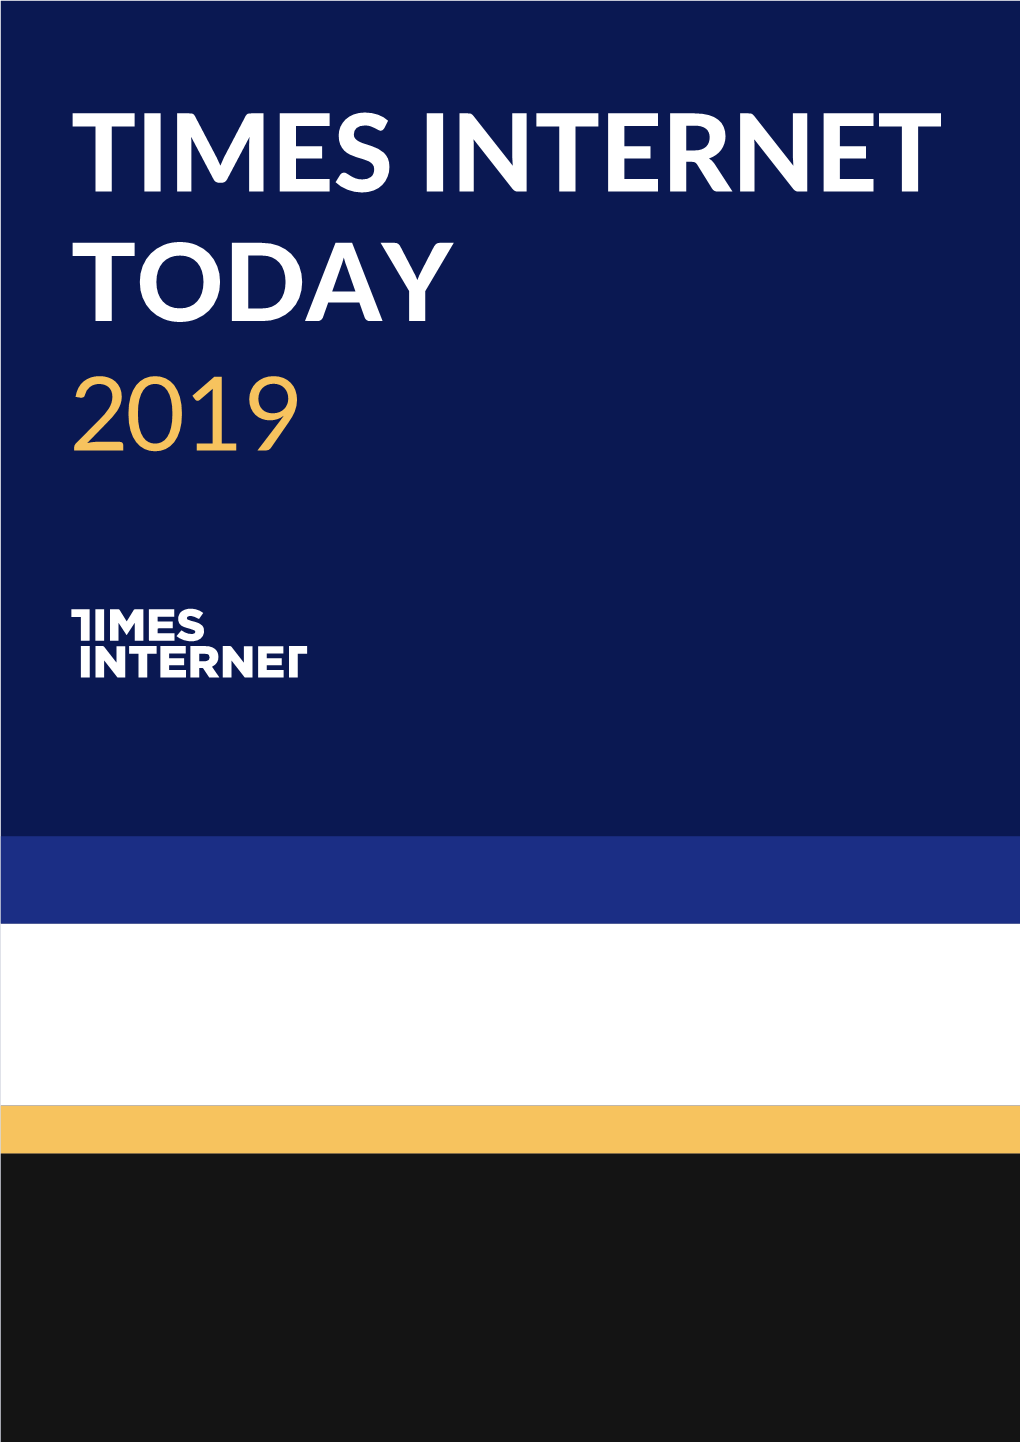 TIMES INTERNET TODAY 2019 Digital India Has Dramatically Changed Over the Last ﬁve Years